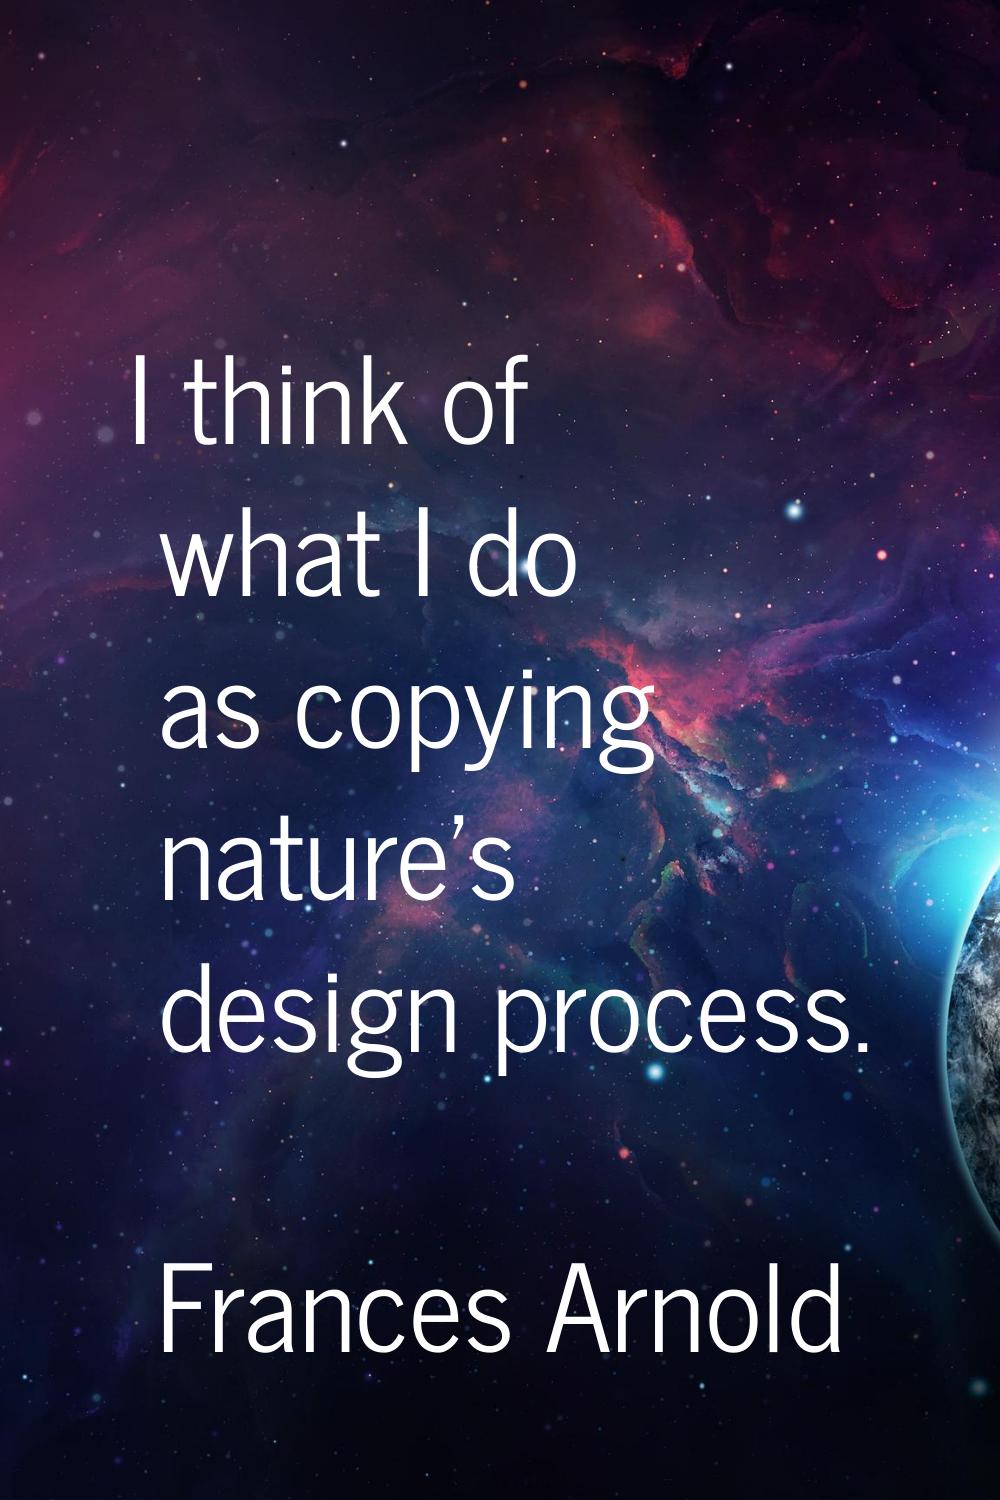 I think of what I do as copying nature's design process.